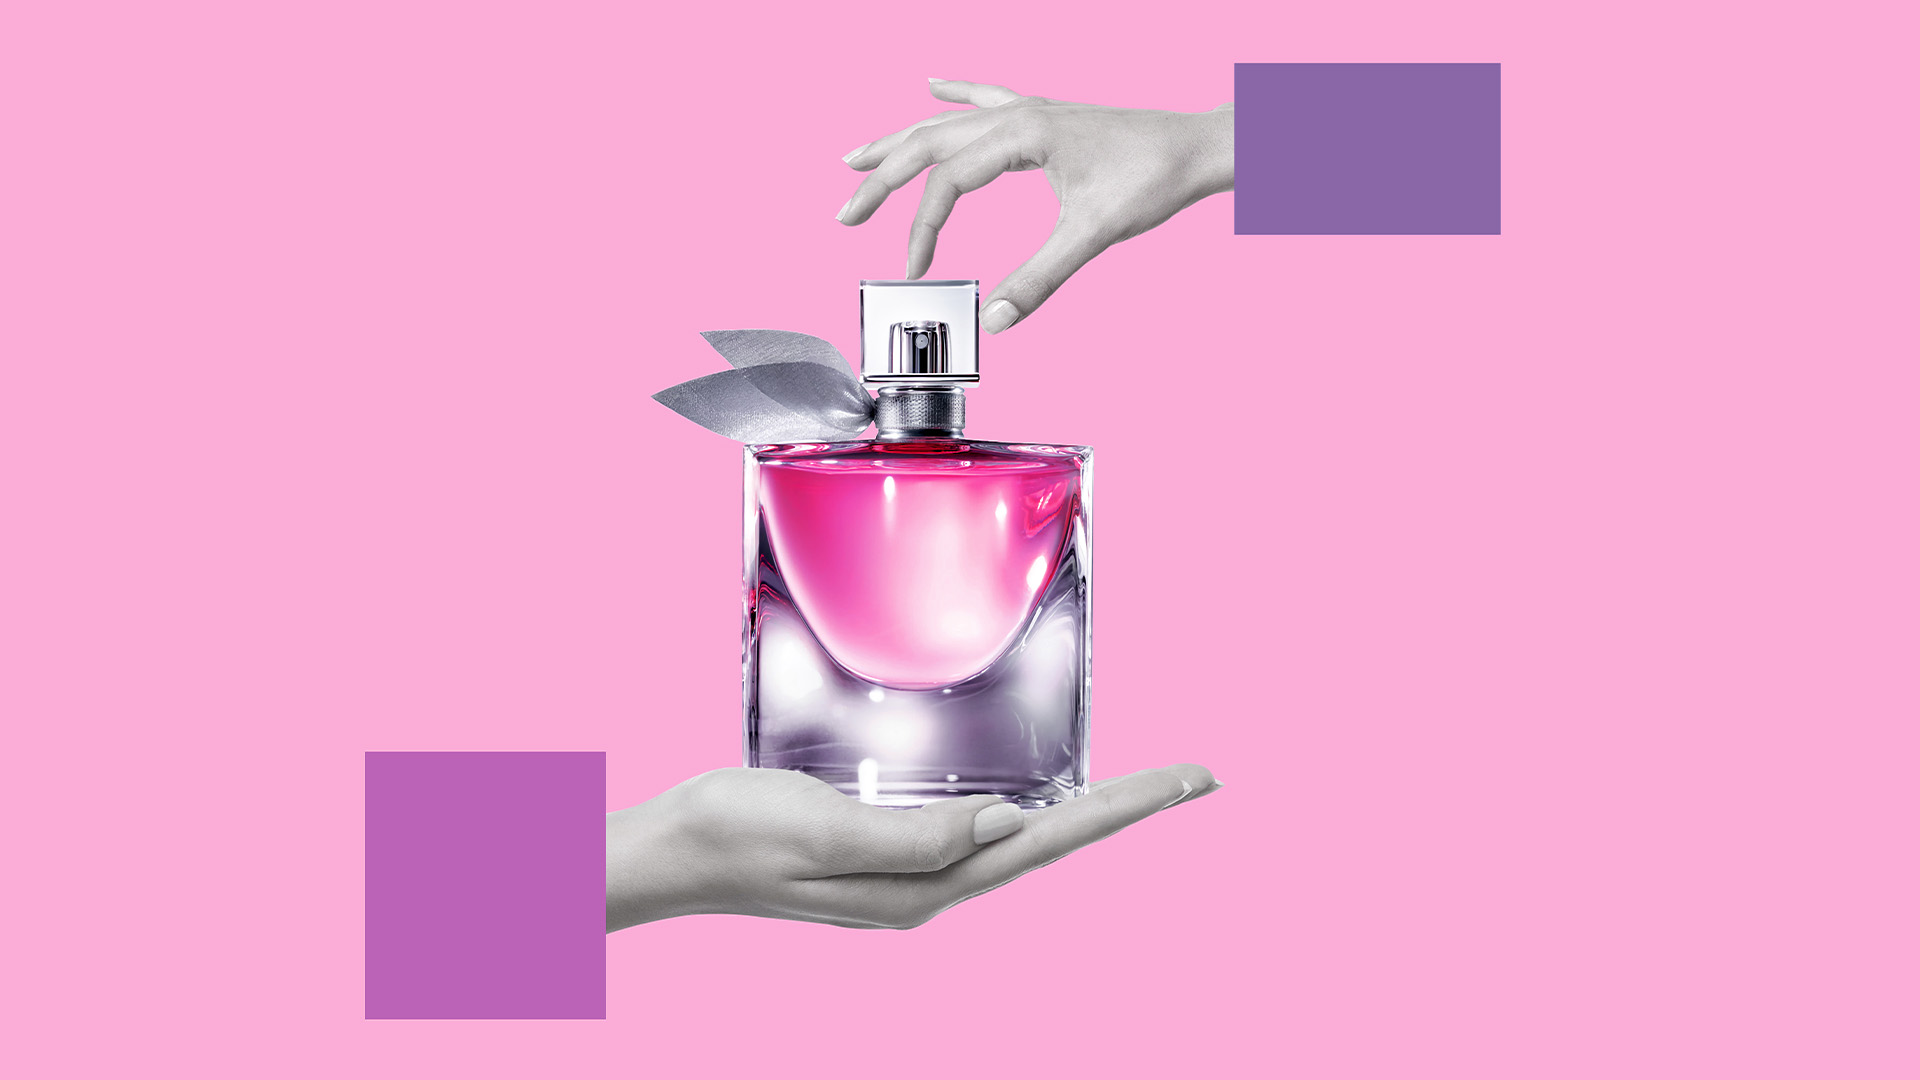 Contemporary art collage of human hands holding women's perfume. A beautiful spray bottle. Modern luxury ladies fragrance. Modern design.